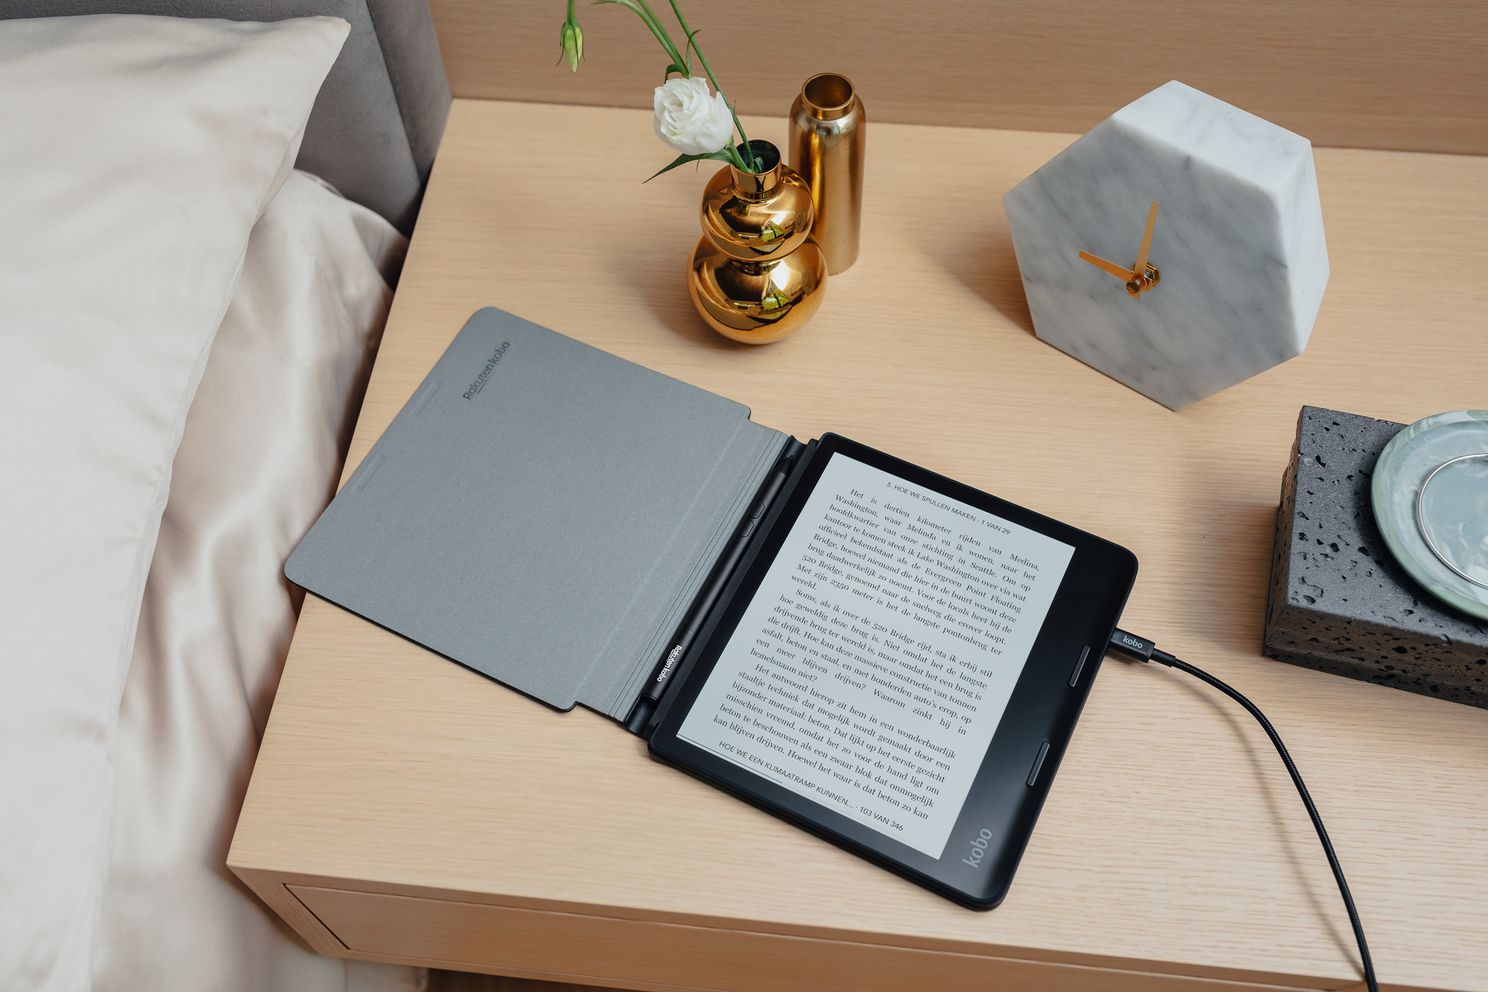 Kobo Sage vs Kobo Libra 2 review: Which e-reader is right for you?